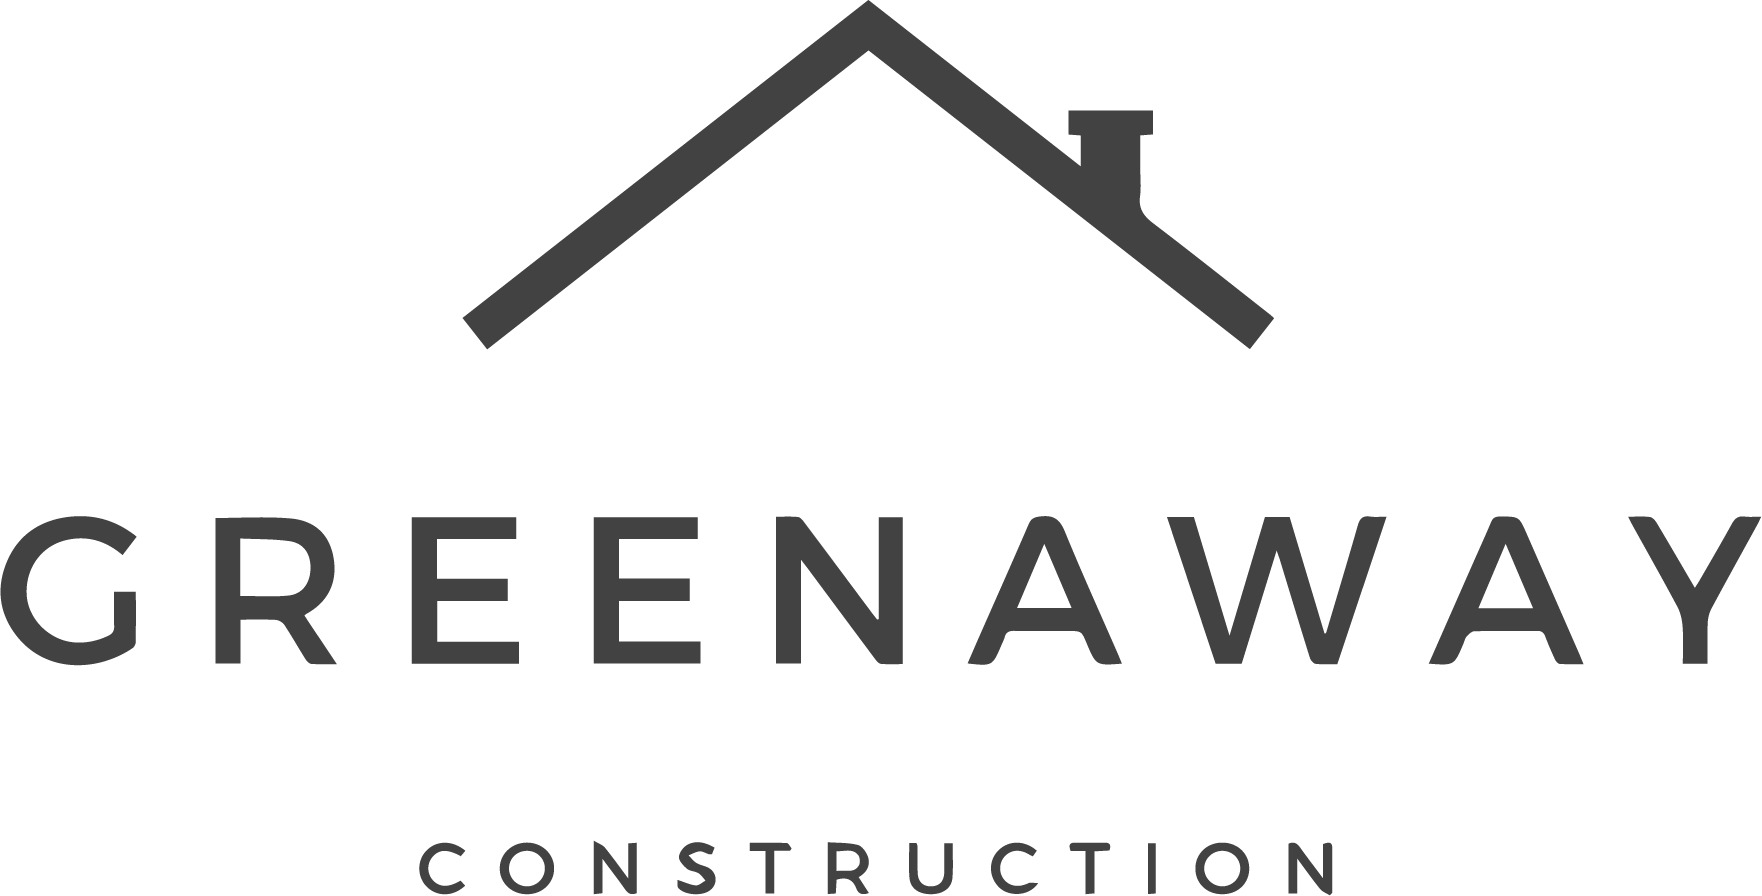 Greenaway Construction Cover Image